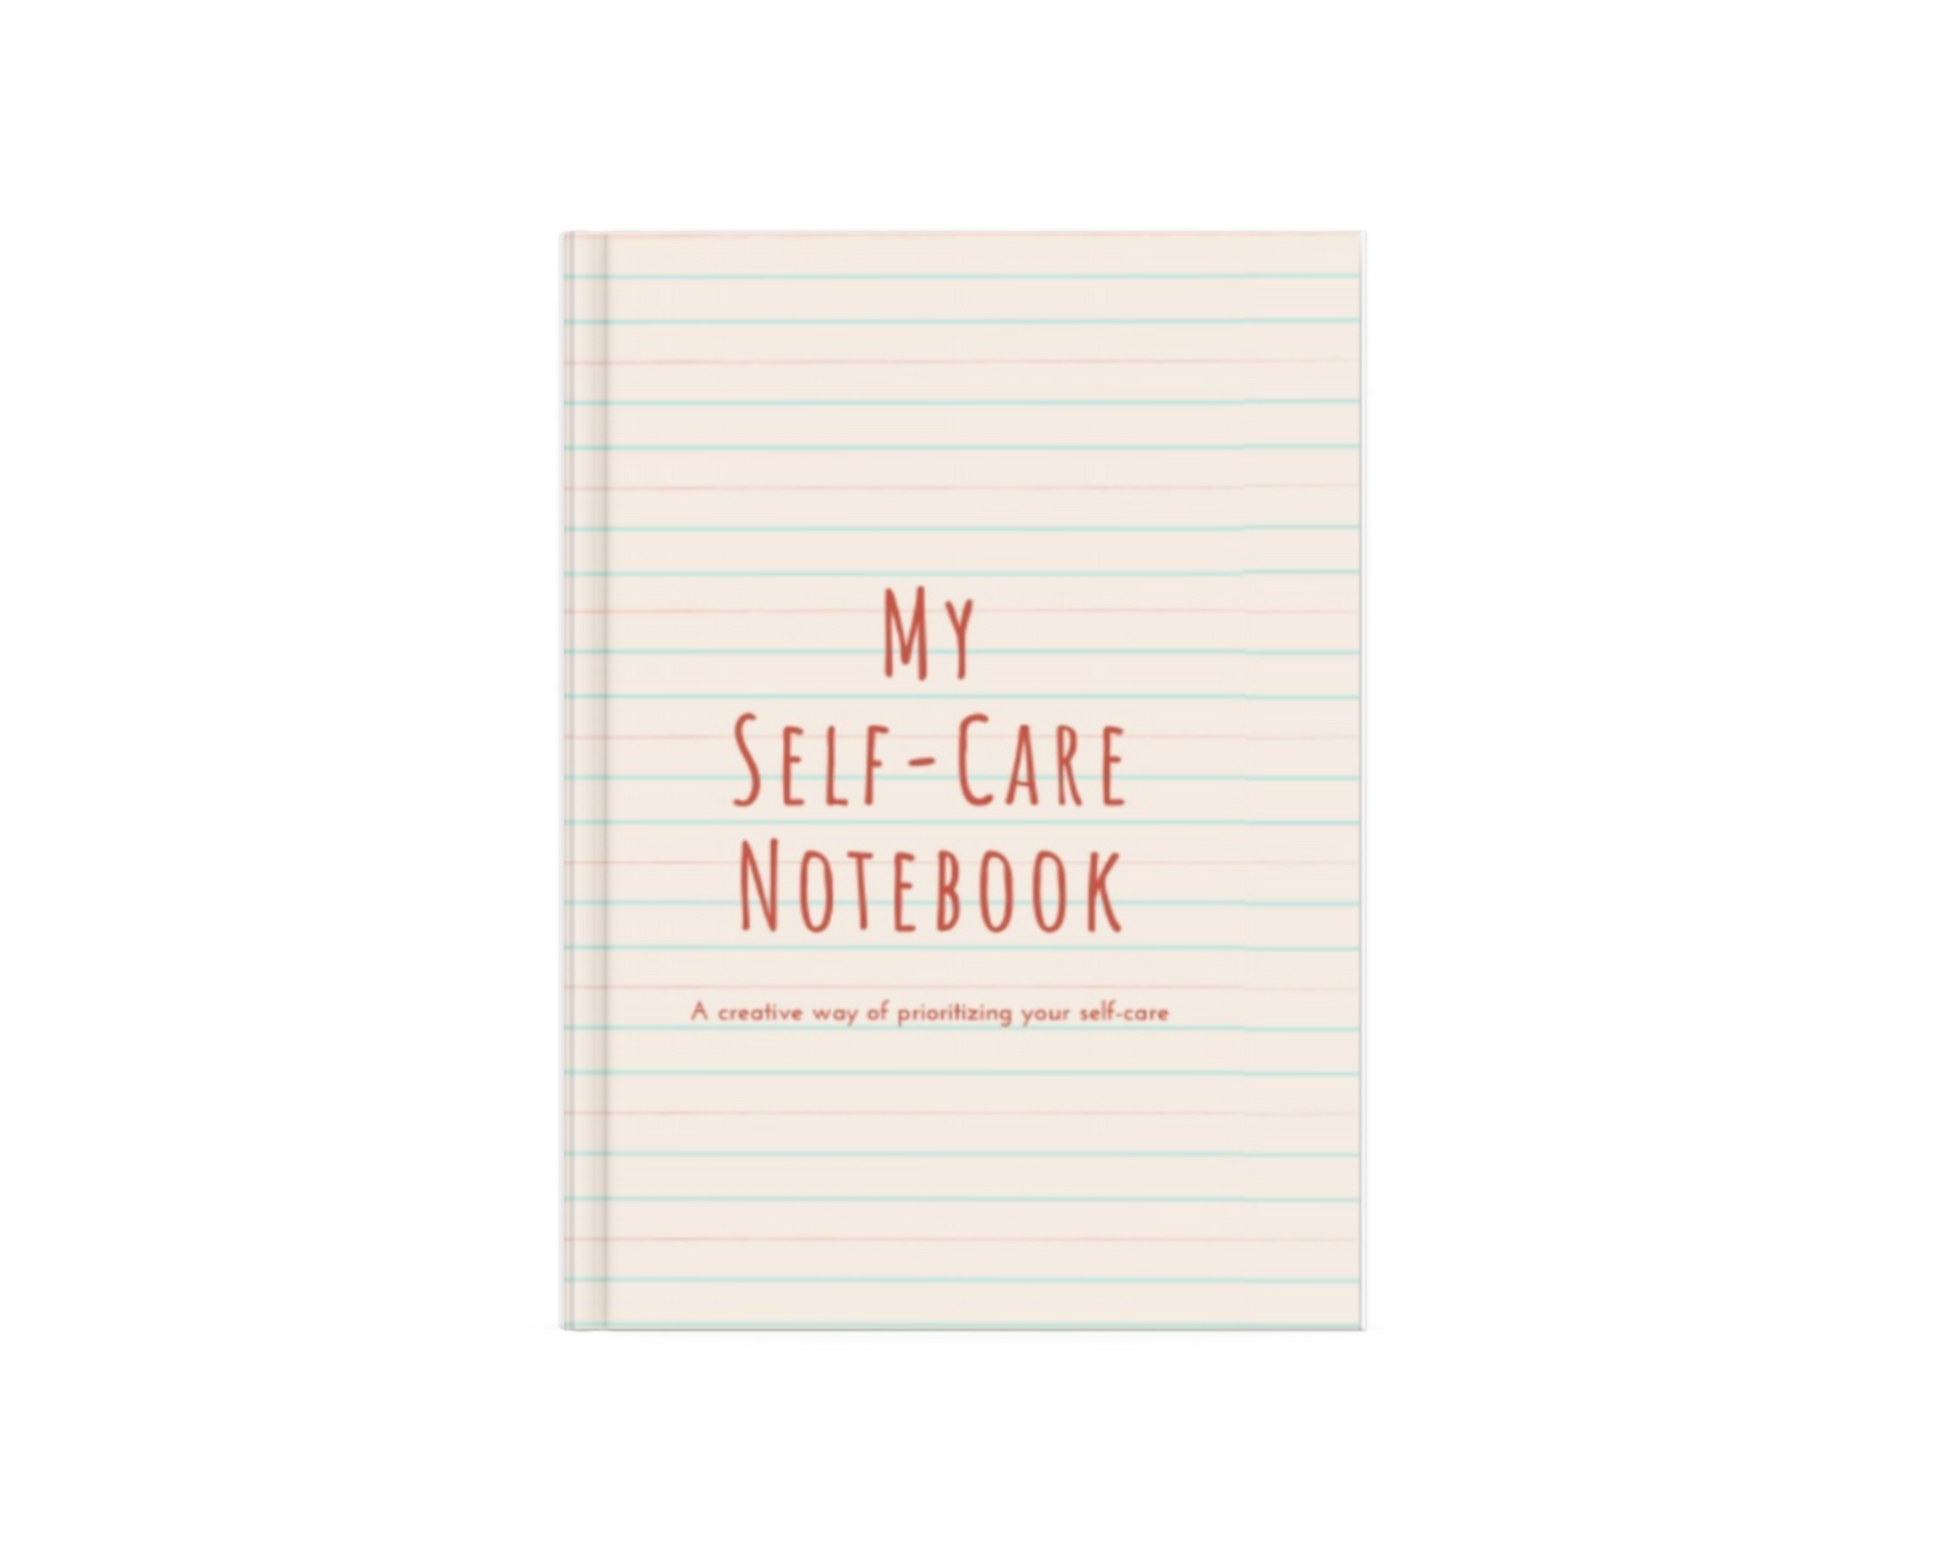 Self-care Notebook. 5 minute mindfulness journal